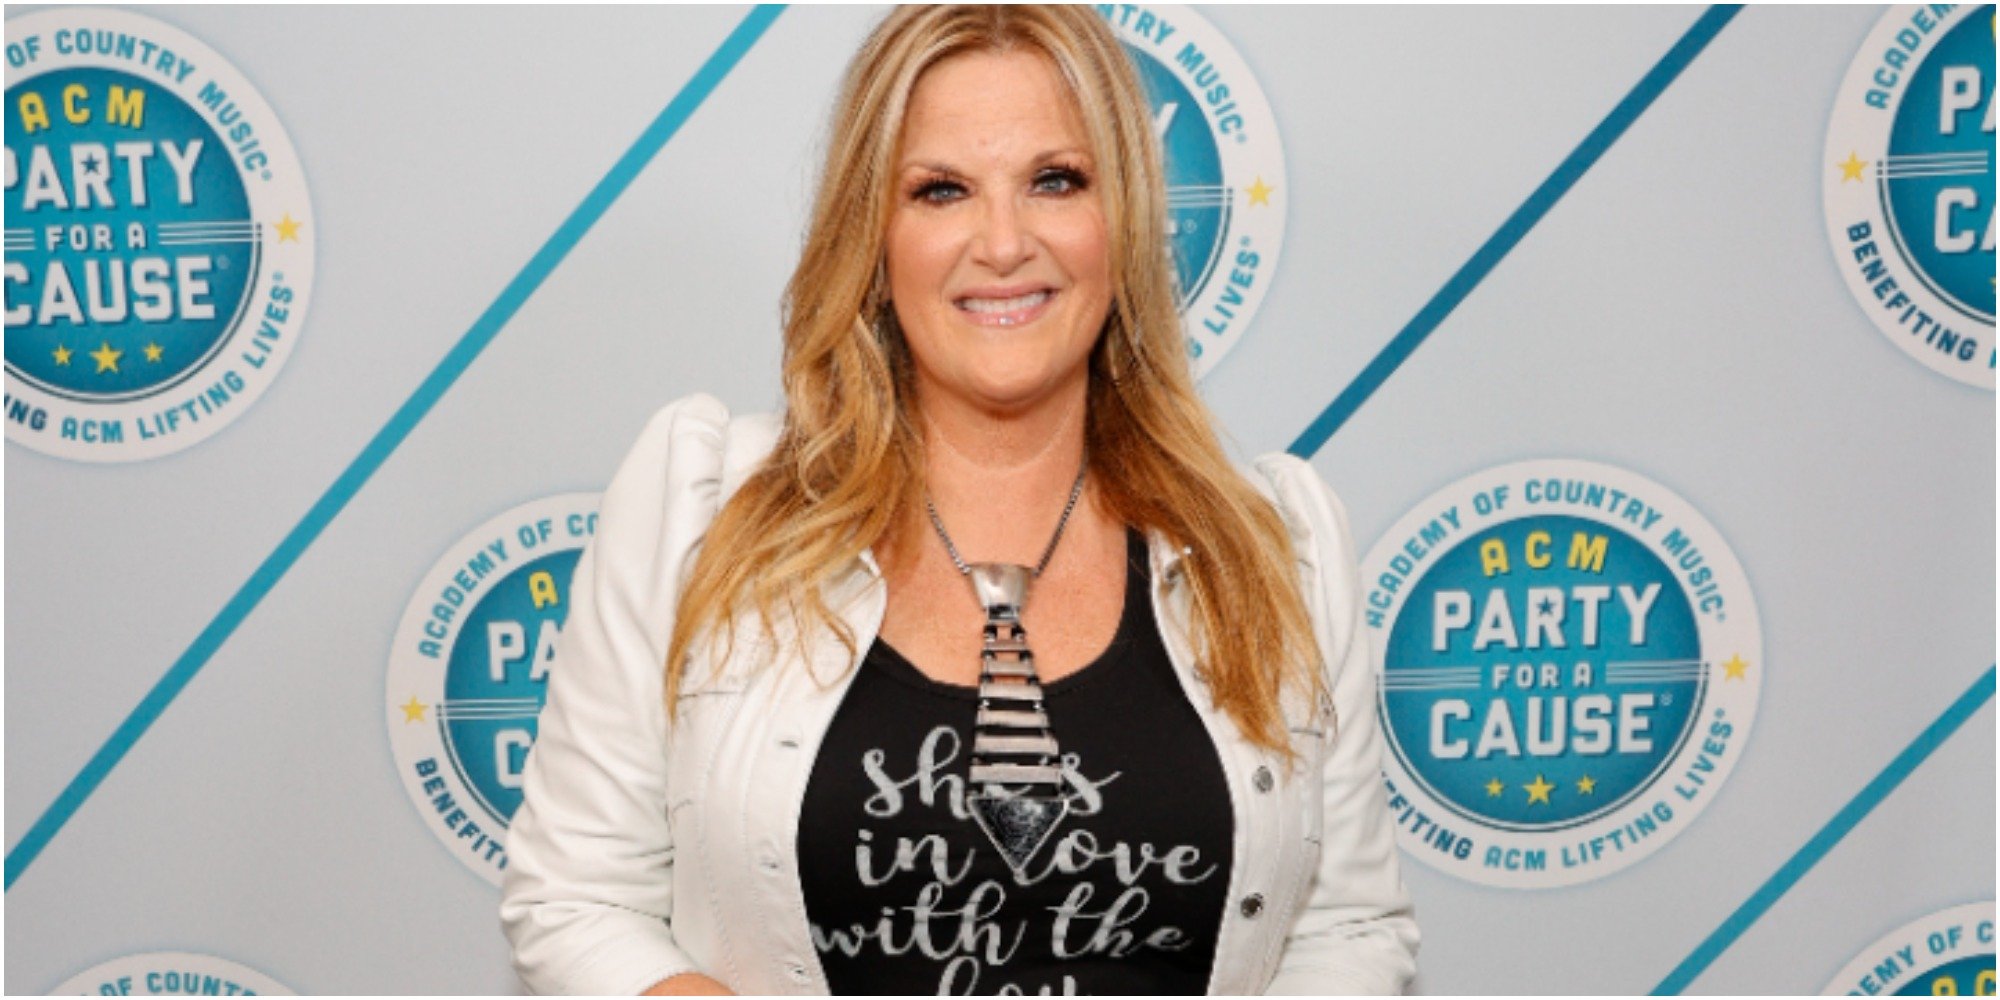 Trisha Yearwood's healthier versions of recipes are available at Food Network's website.